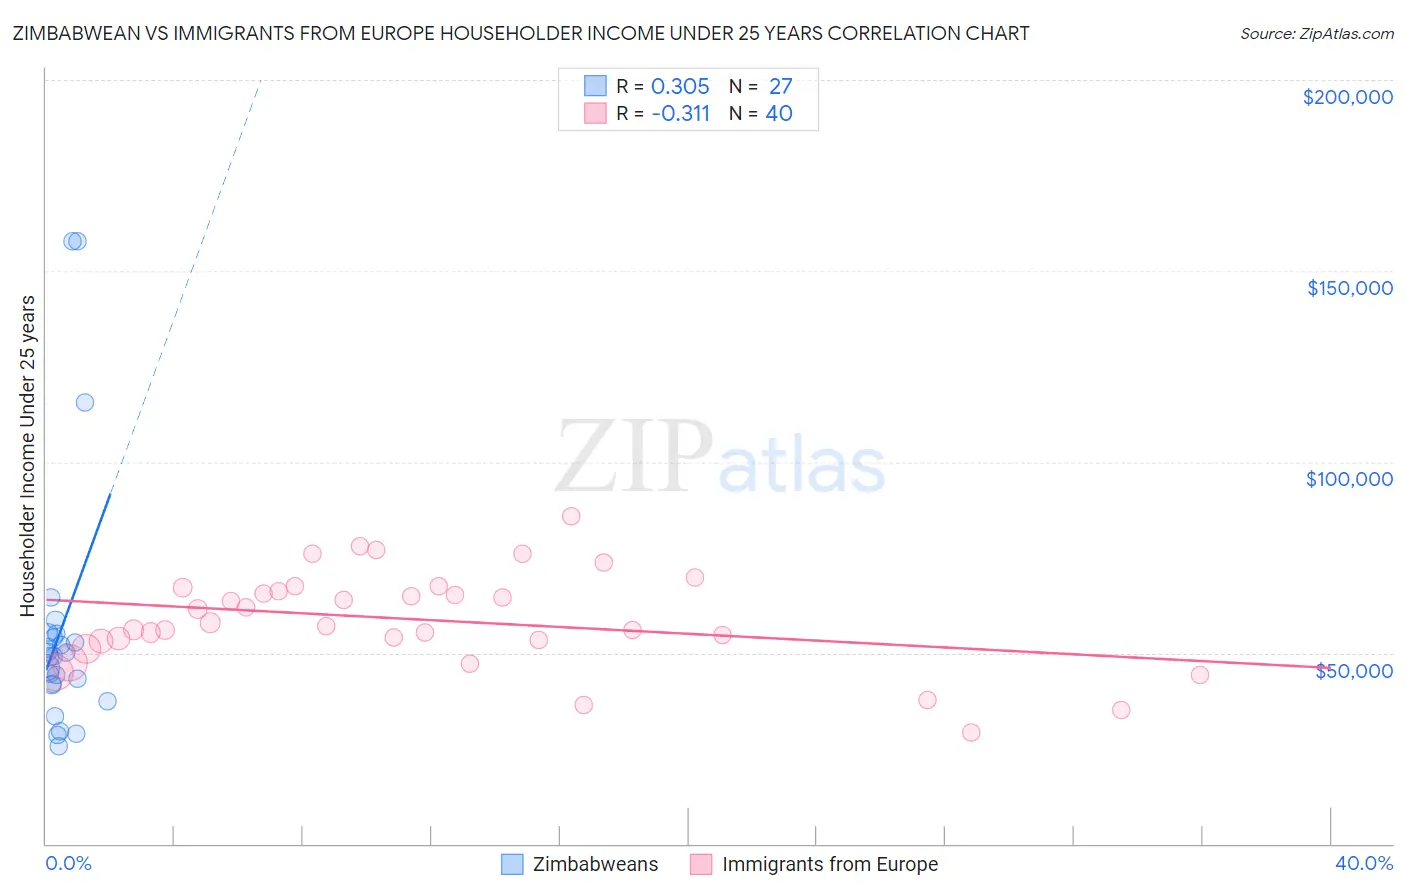 Zimbabwean vs Immigrants from Europe Householder Income Under 25 years